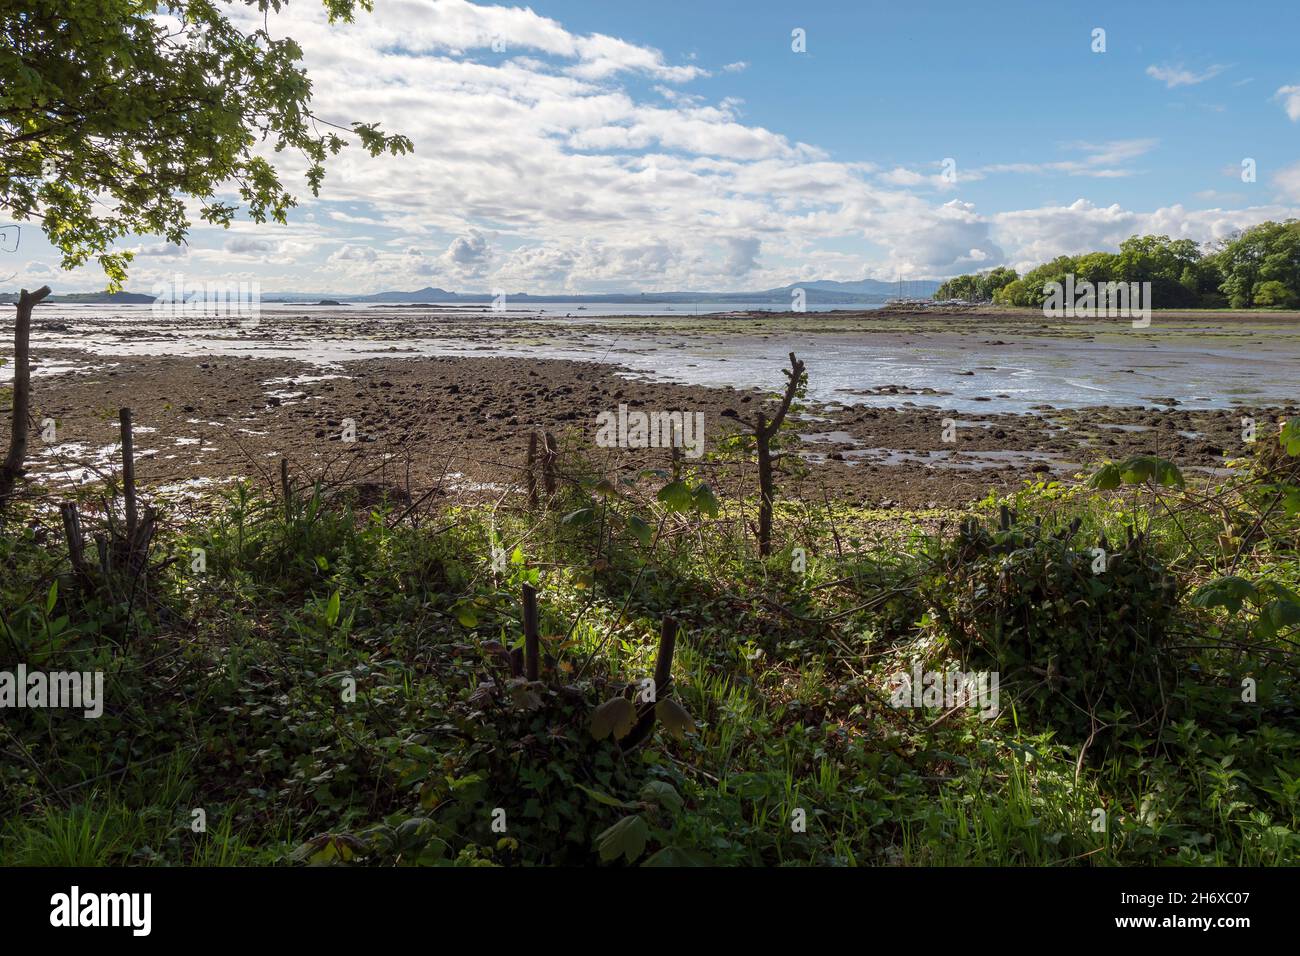 View from the Fife Coastal Path at Dalgety Bay over the Firth of Forth to the Lothian Coast beyond. Stock Photo